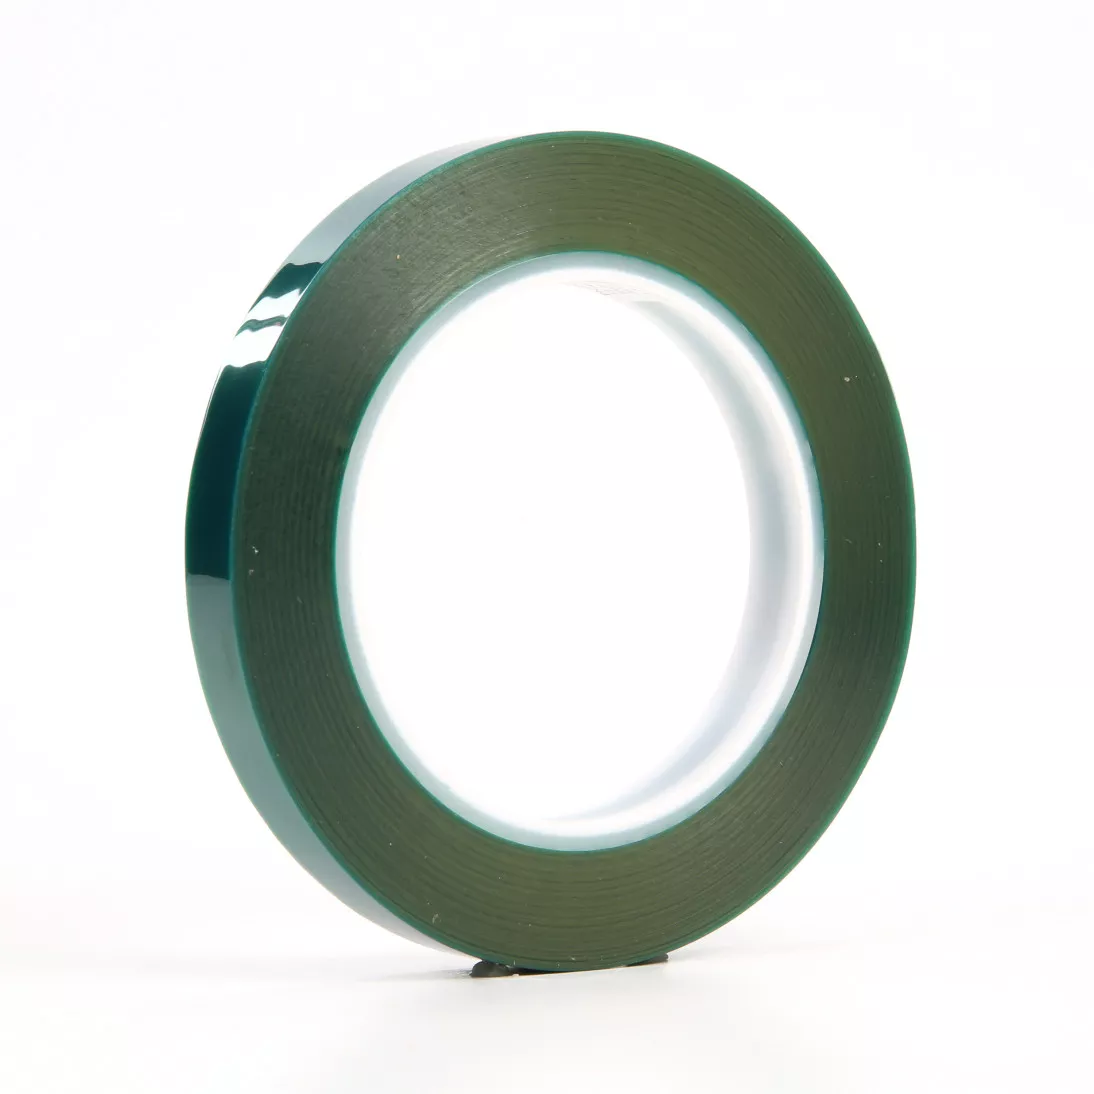 3M™ Polyester Tape 8992, Green, 1/2 in x 72 yd, 3.2 mil, 72 rolls per
case